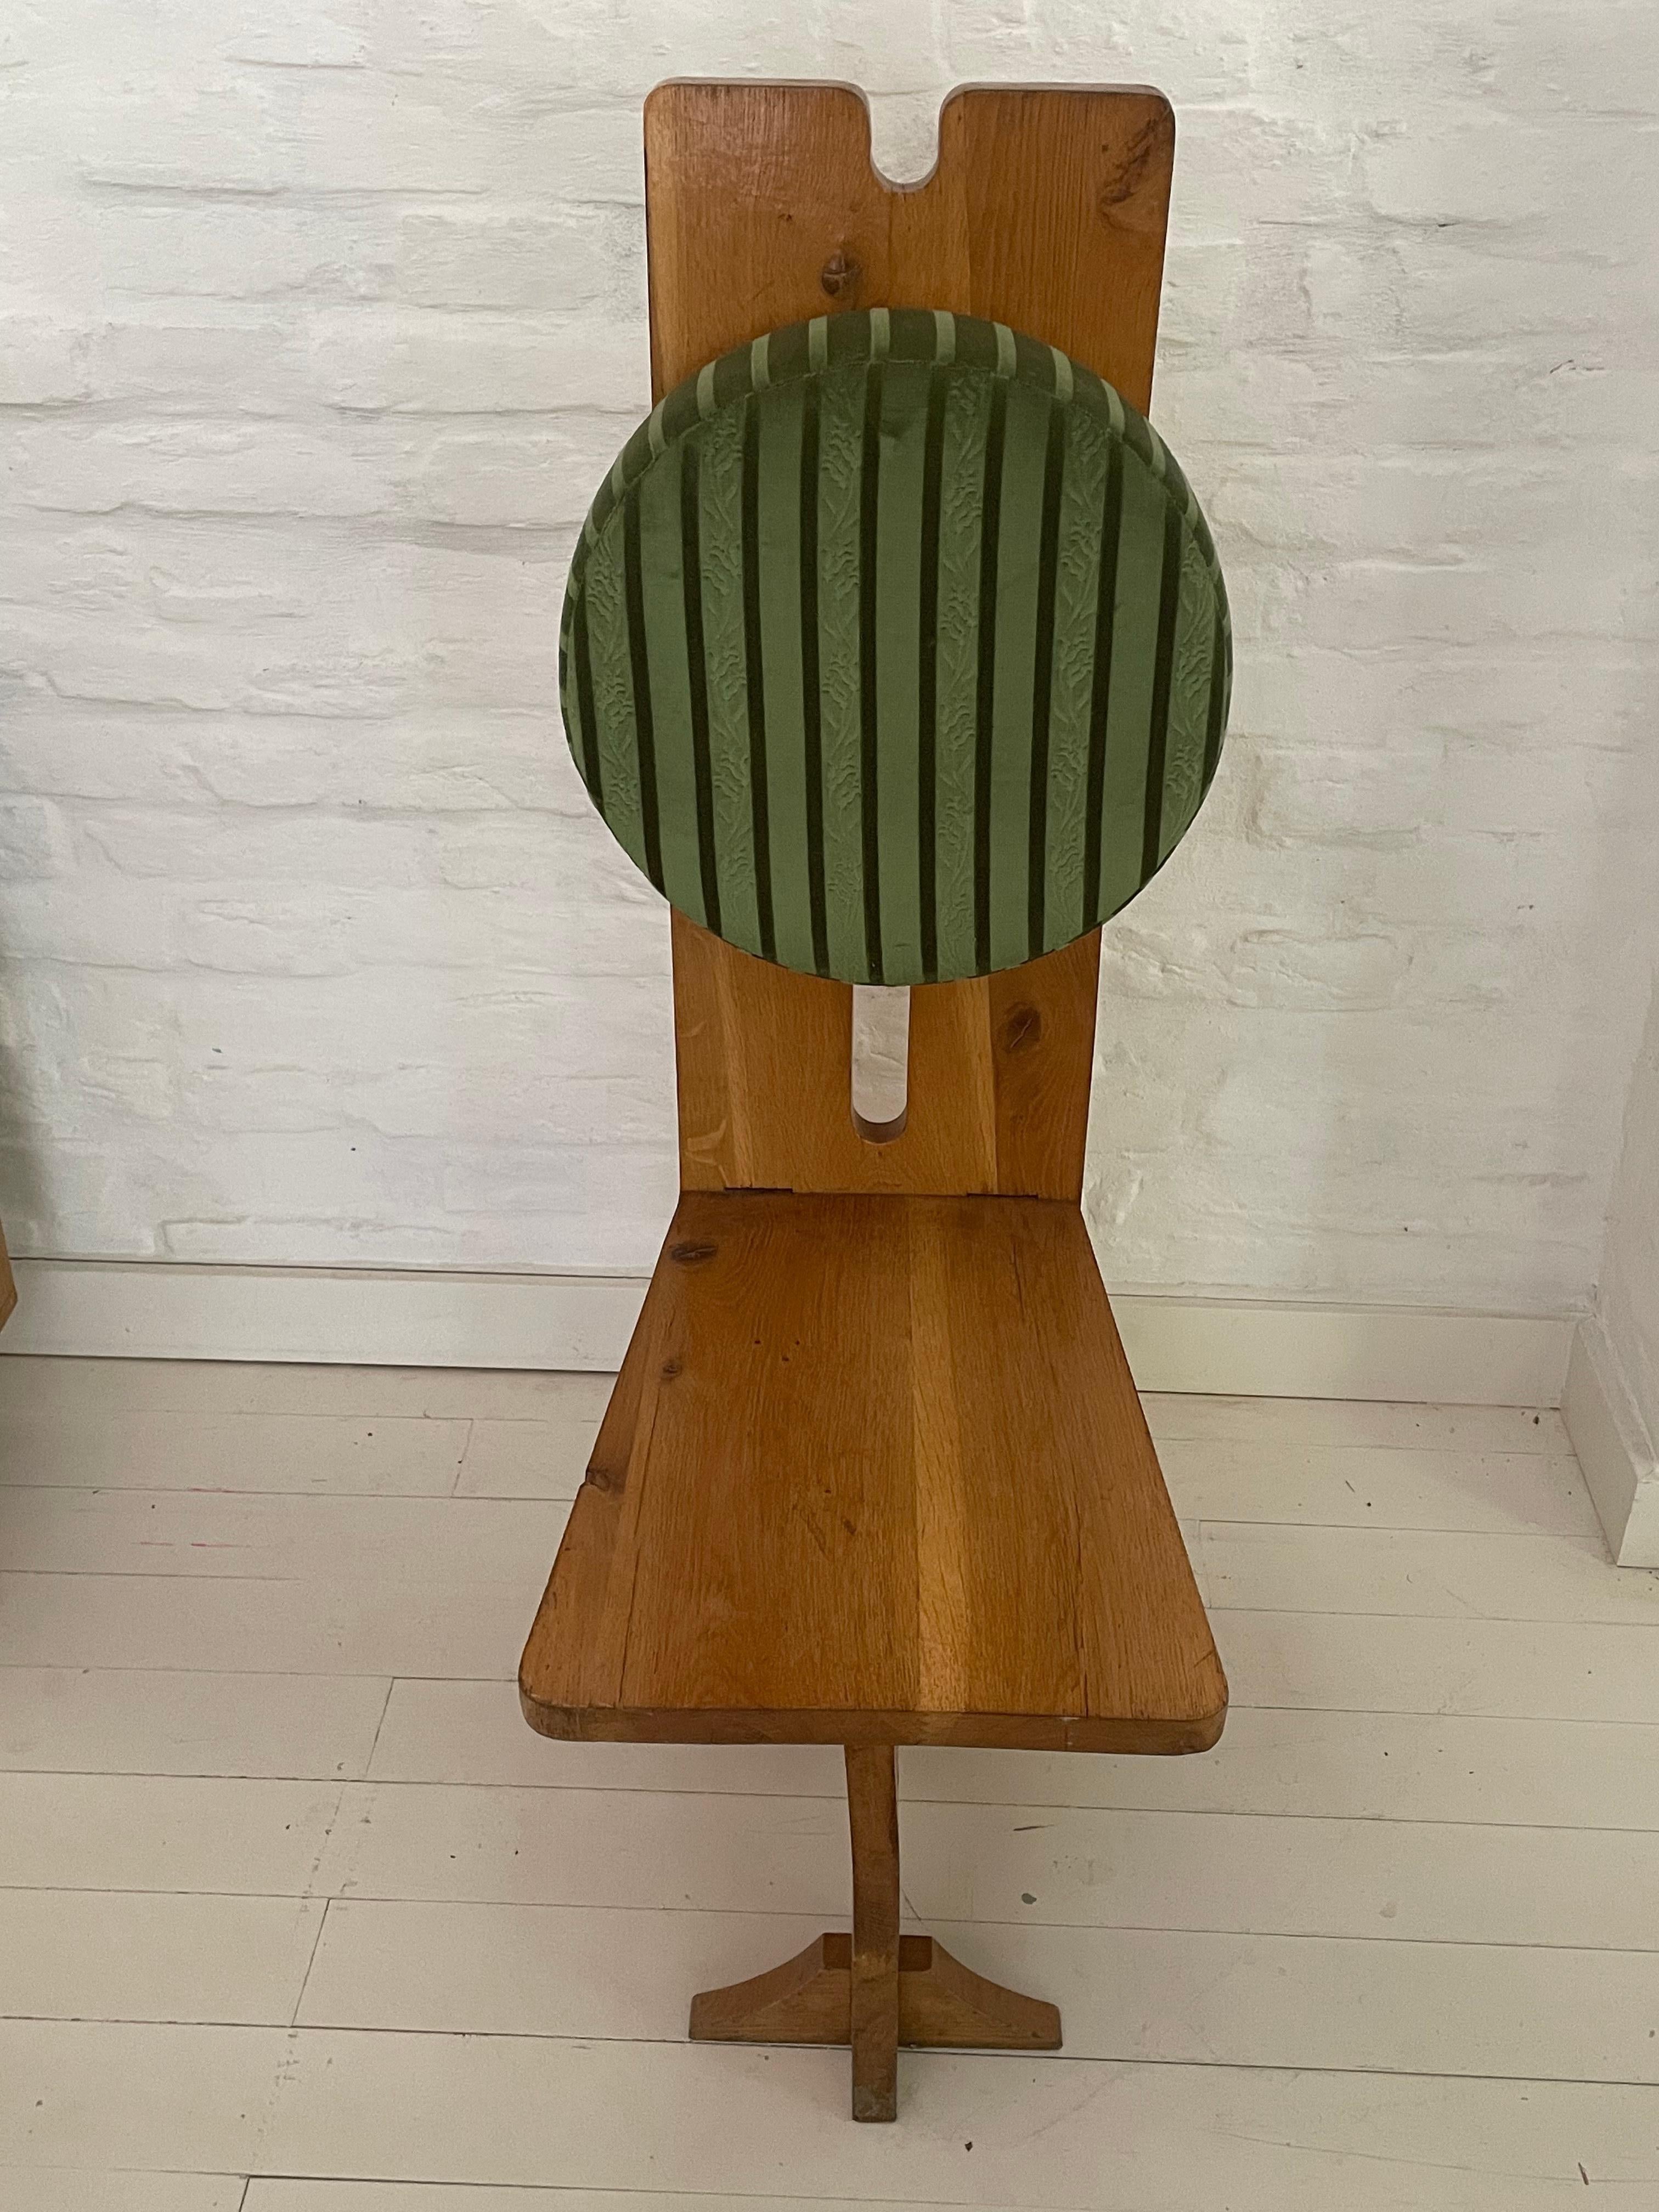 Unique high back chairs with geometrically shaped seat and backrest. Handcrafted and upholstered rest in an Arts & Crafts style.
The chair has authentic mortise and tenon joints and is tight and strong.
Overall, this rare chair has a great